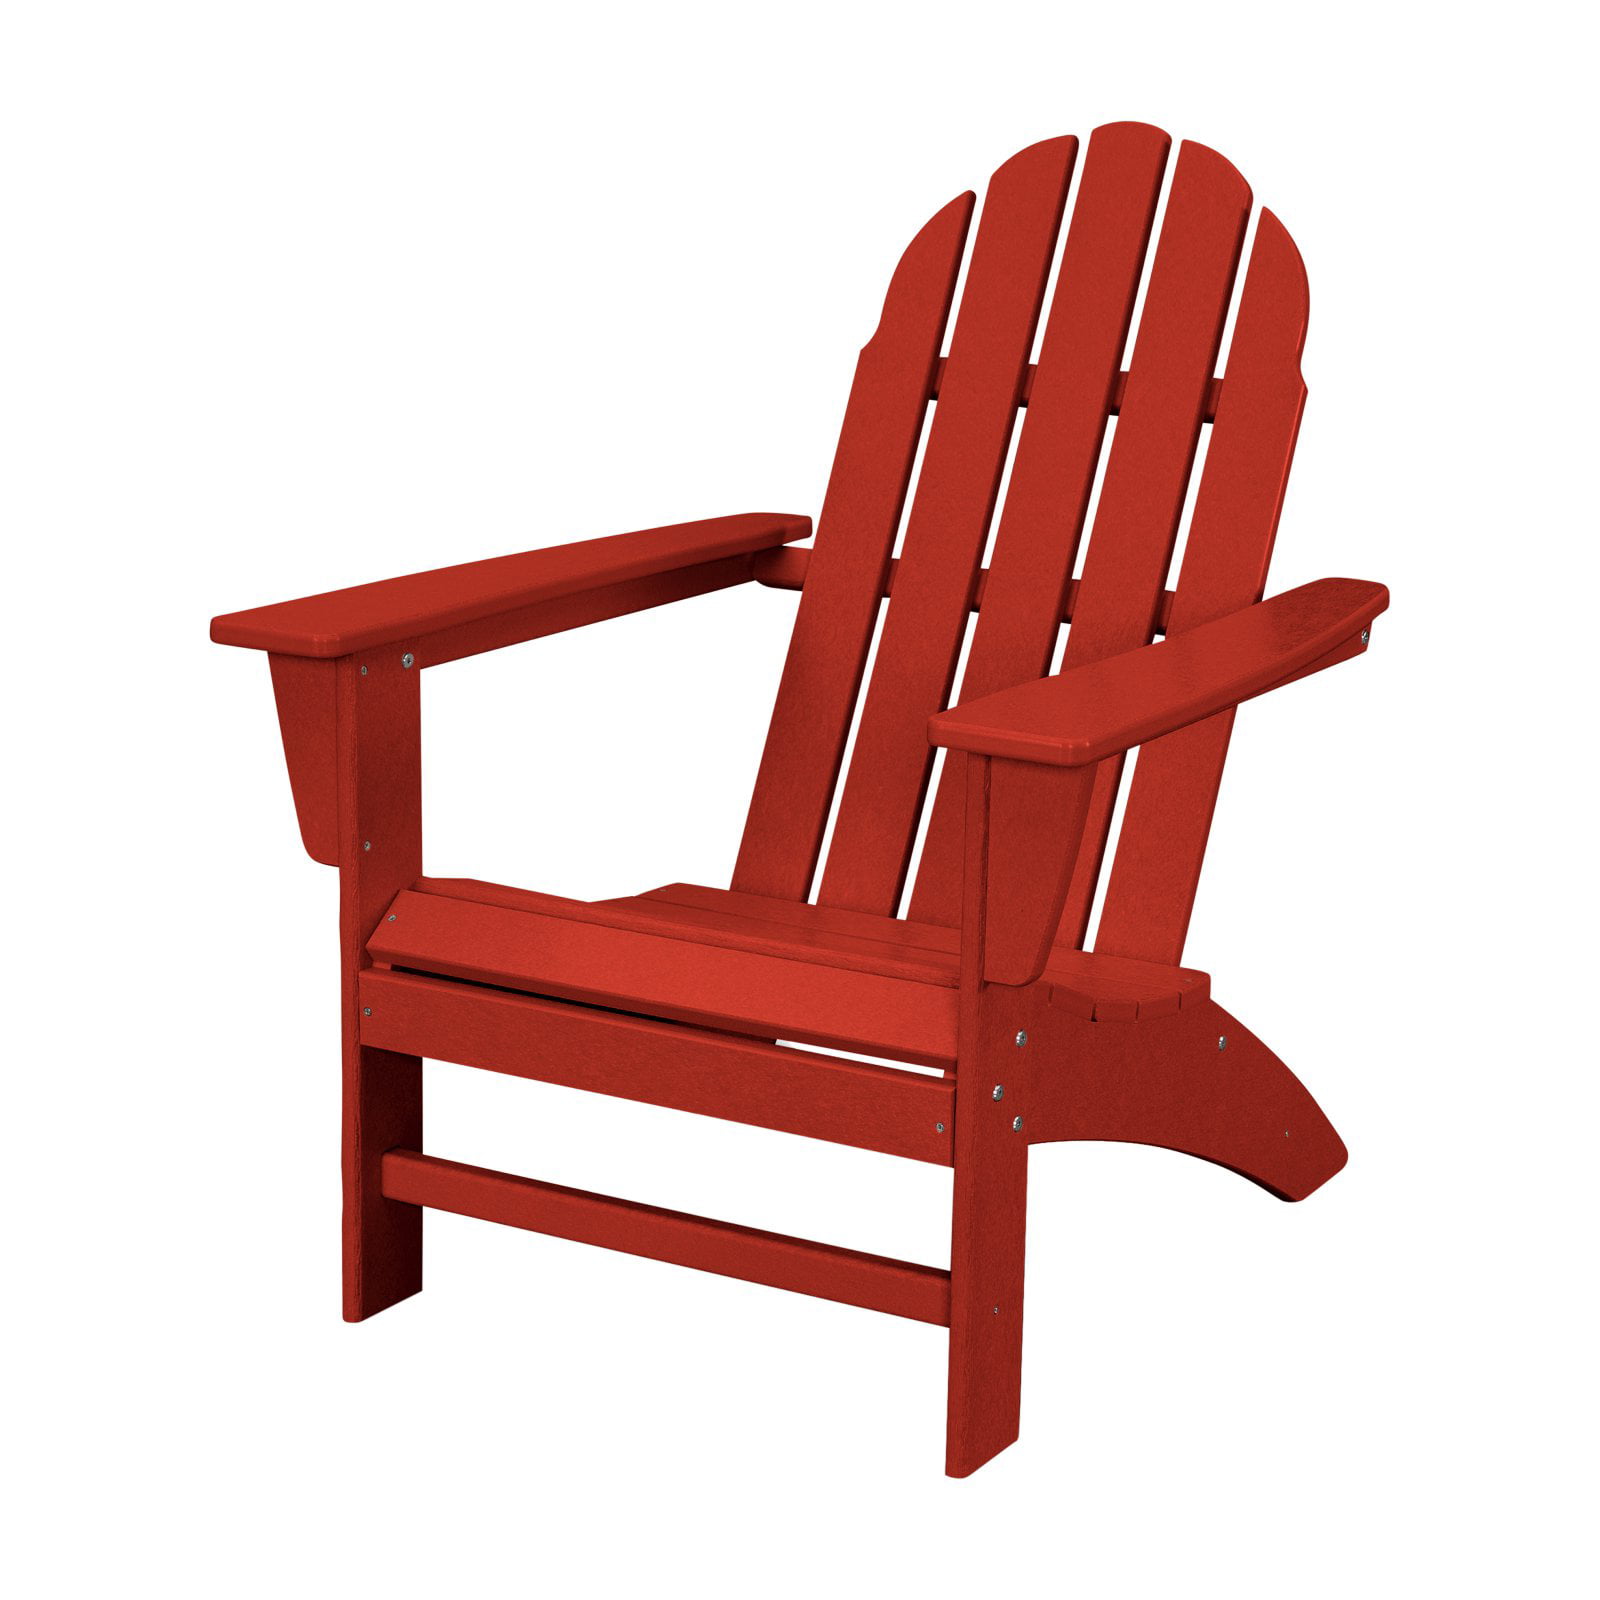 11 Adirondack Chairs That Will Become Your Favorite Place To Sit This Summer